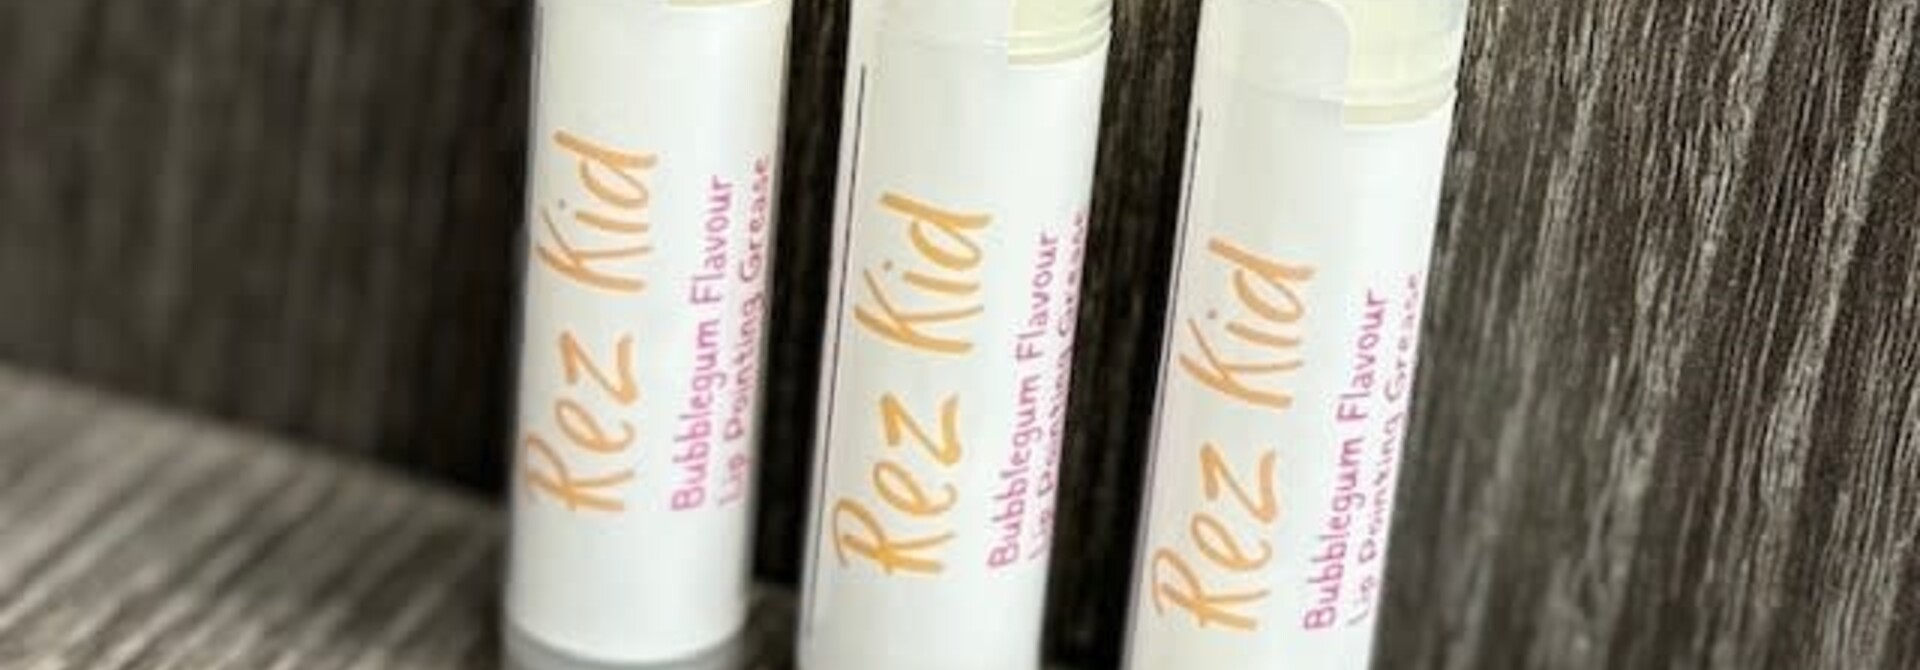 Lip Pointing Grease - Rez Kid by Sweetgrass Soap